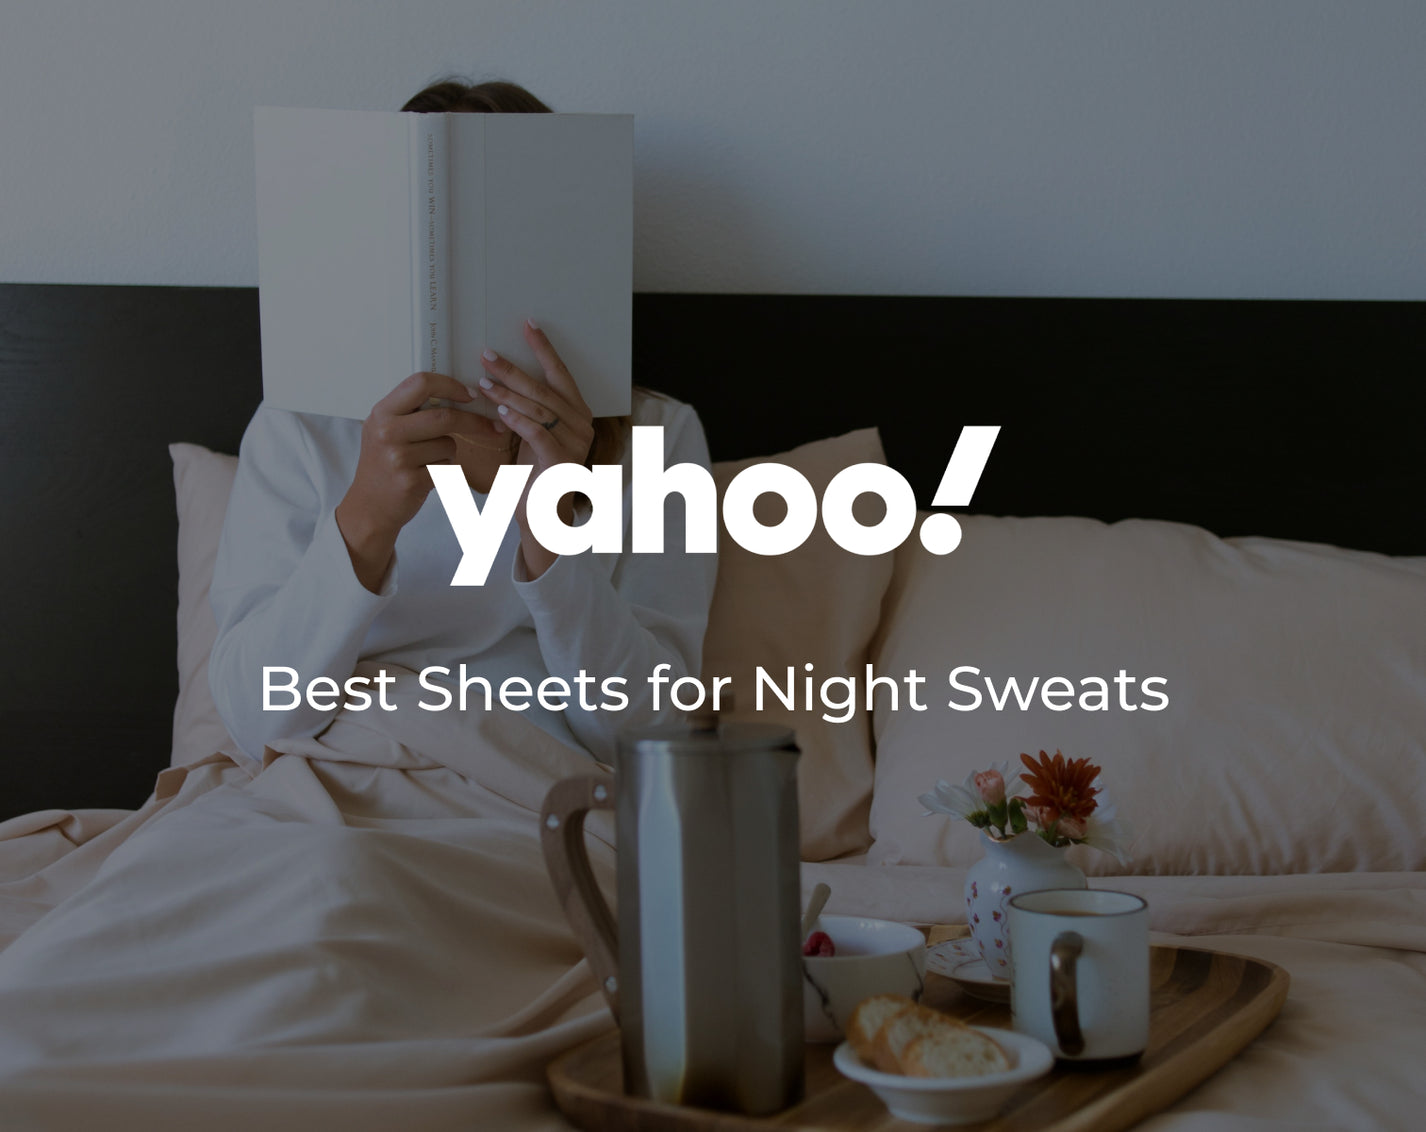 Yahoo! Best Sheets for Night Sweats